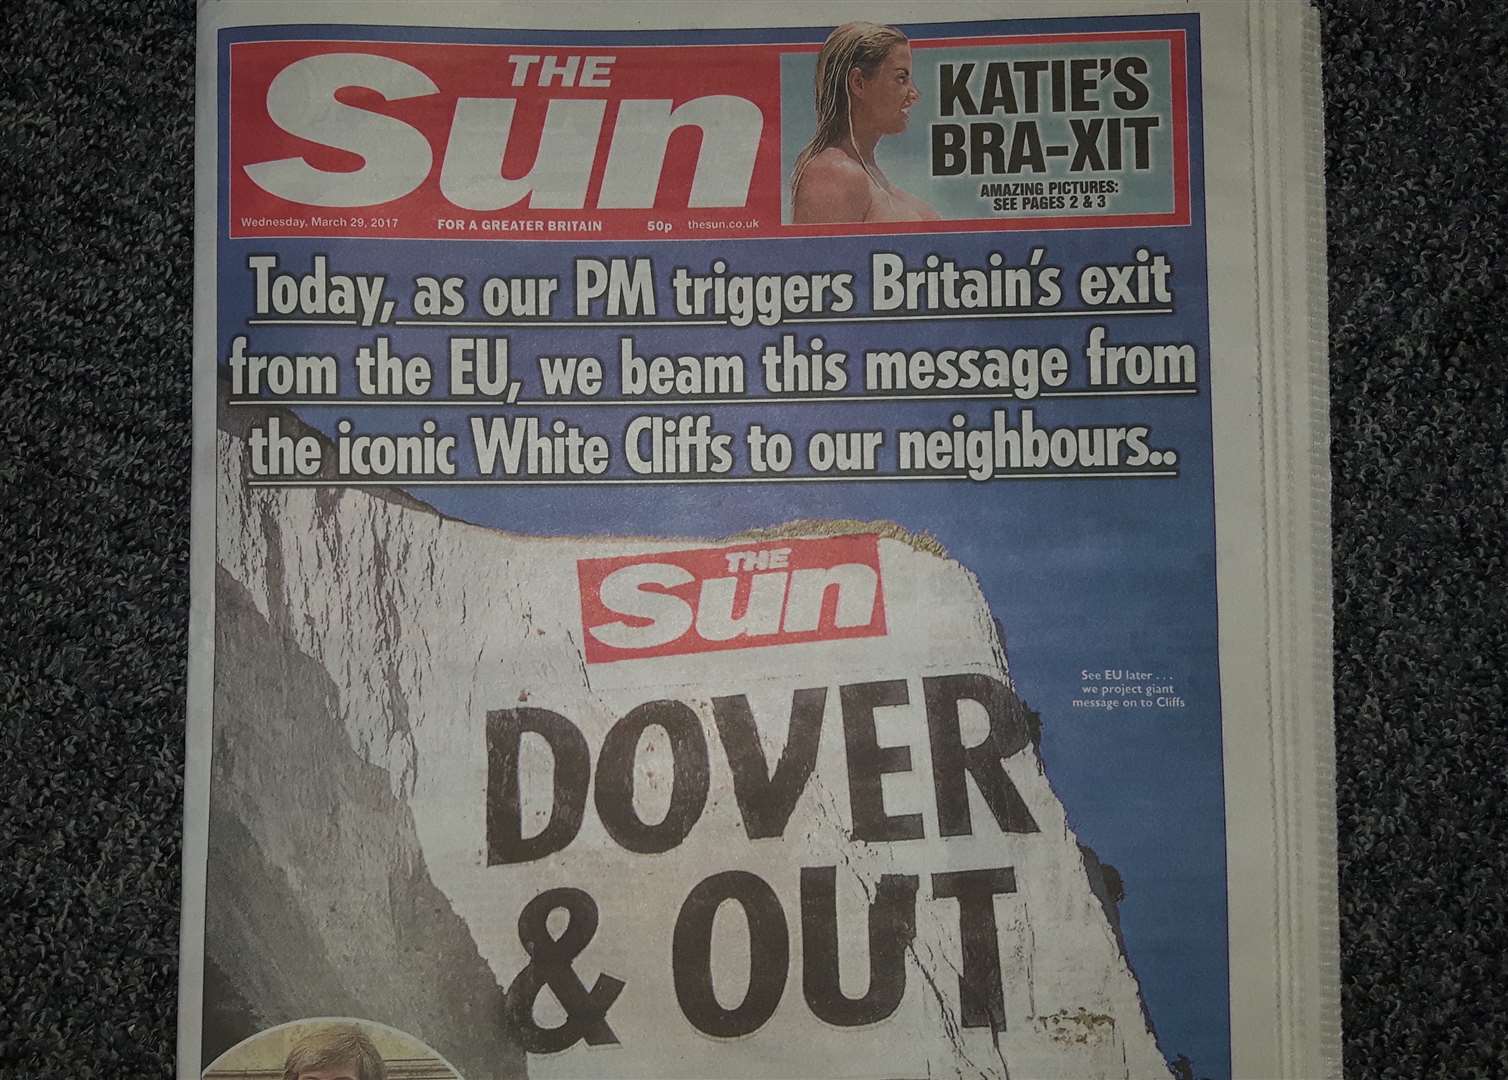 A photograph The Sun newspaper's front page